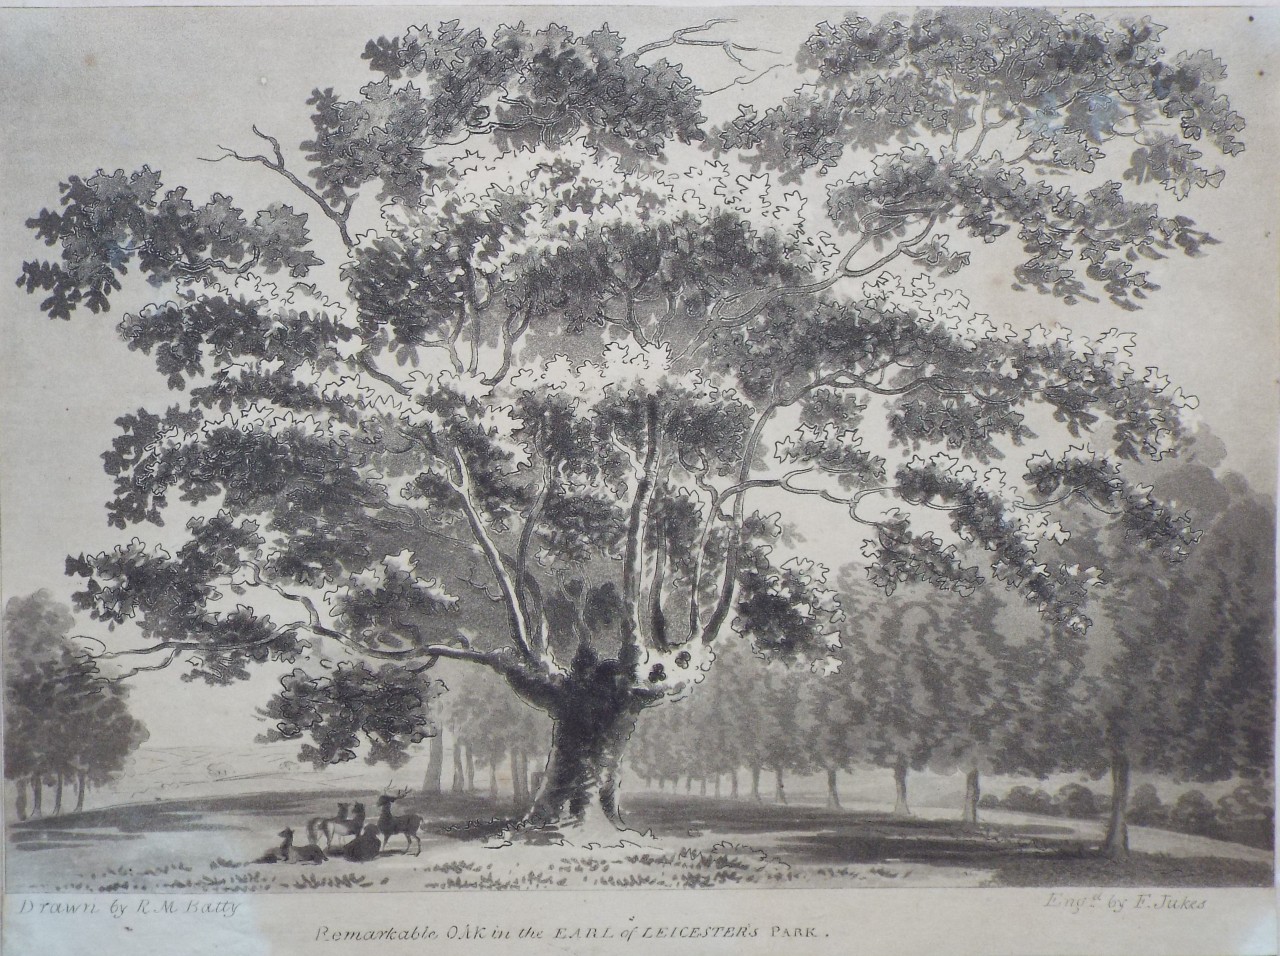 Aquatint - Remarkable Oak in the Earl of Leicester's Park. - Jukes